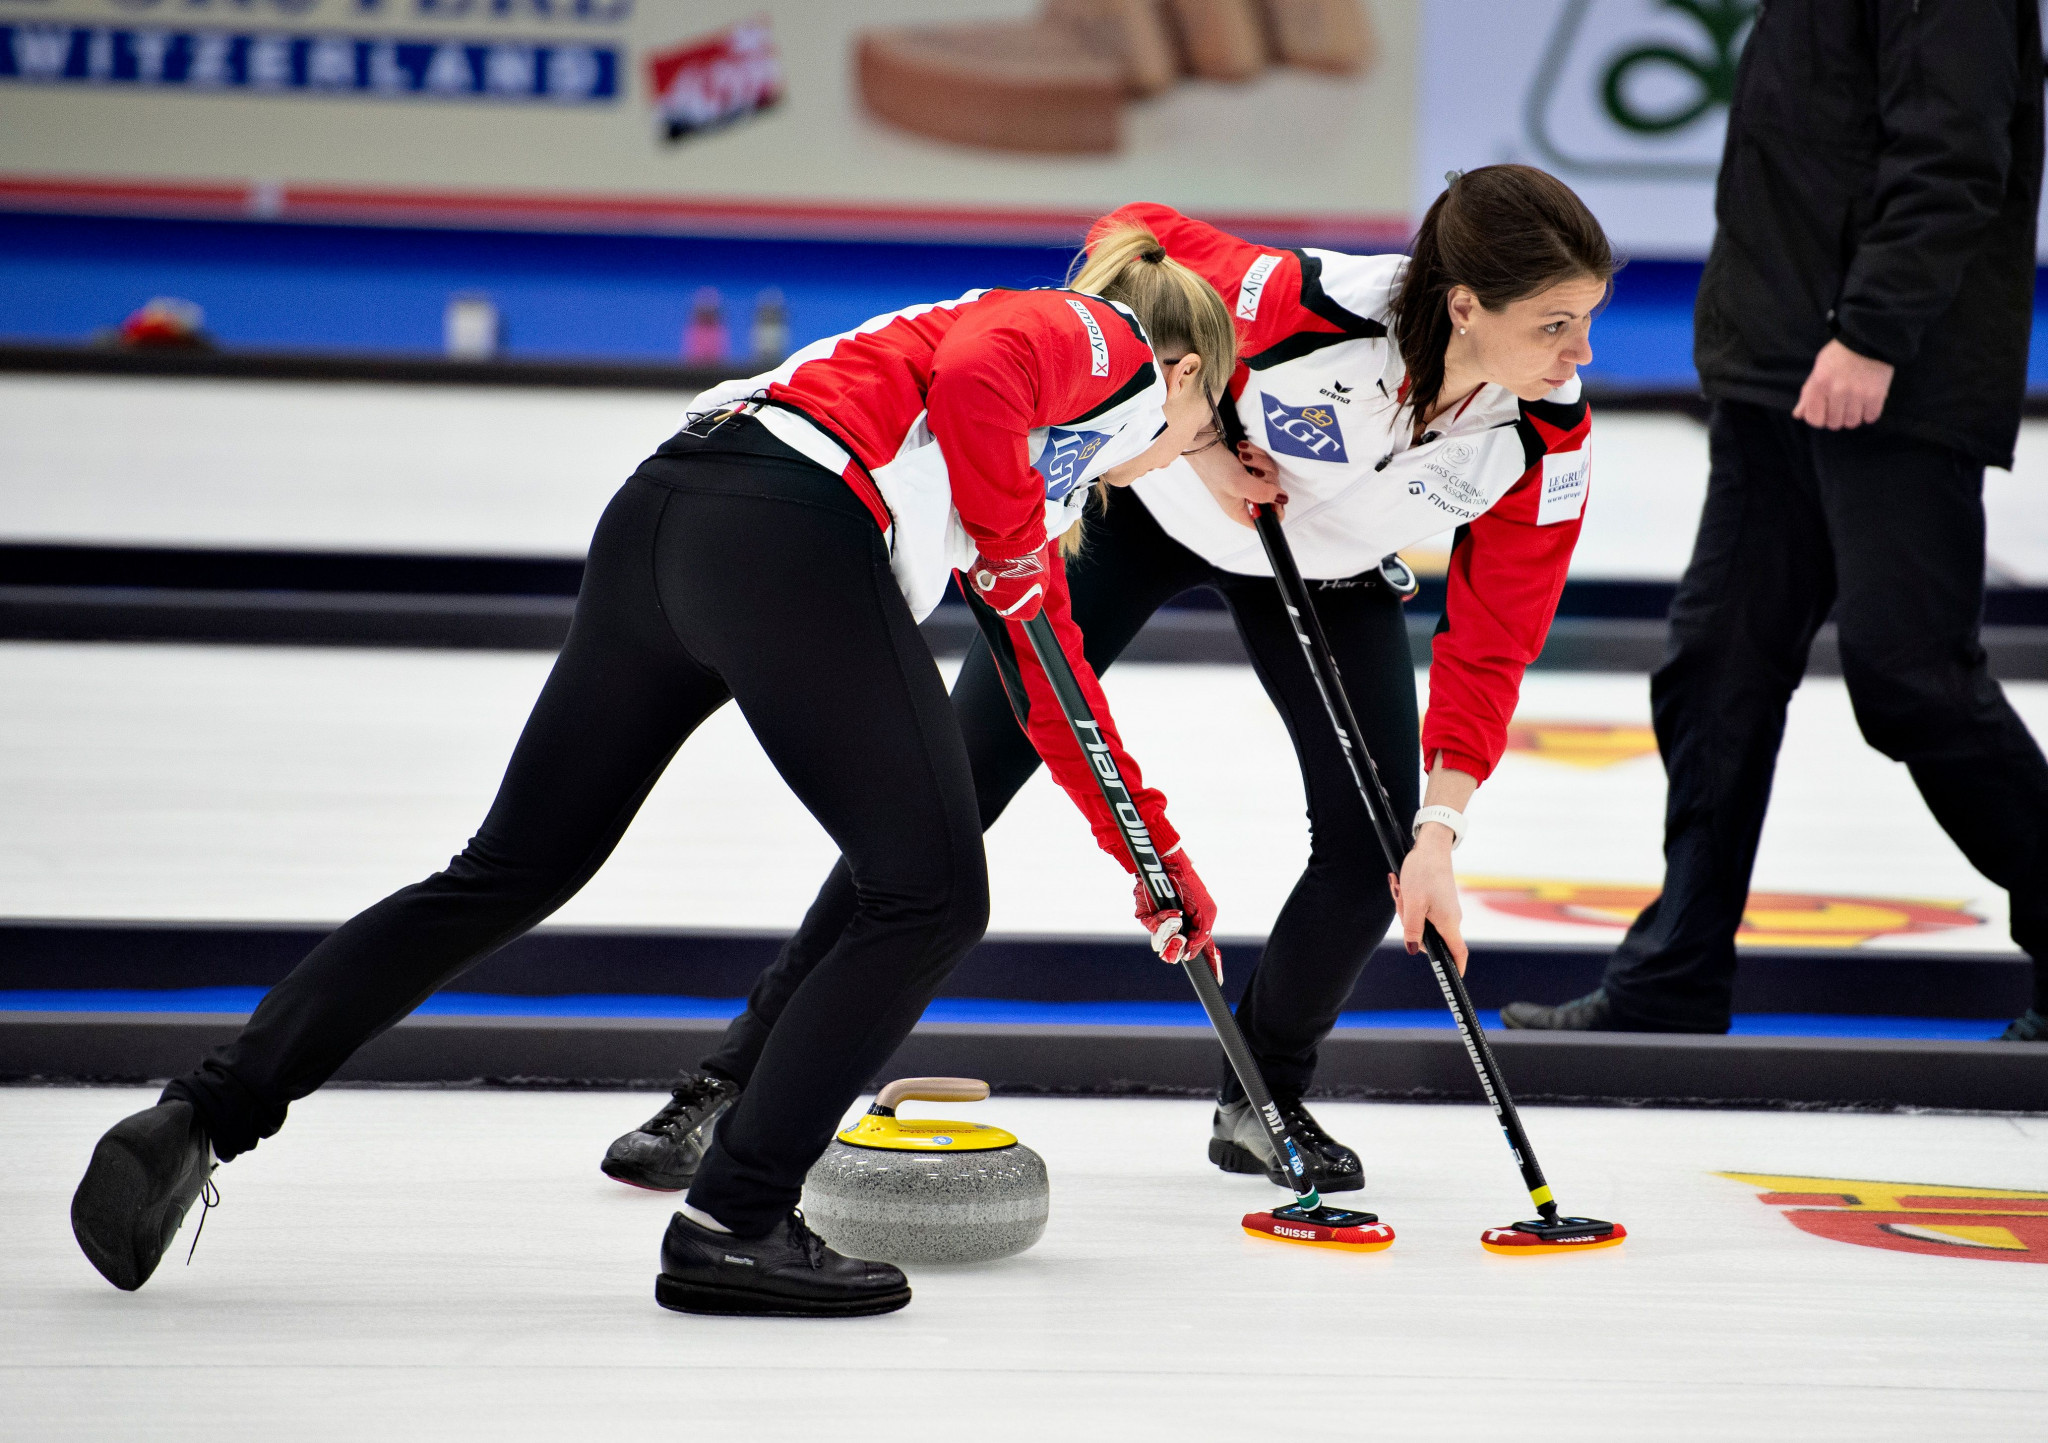 Switzerland are the reigning women's curling world champions ©Getty Images